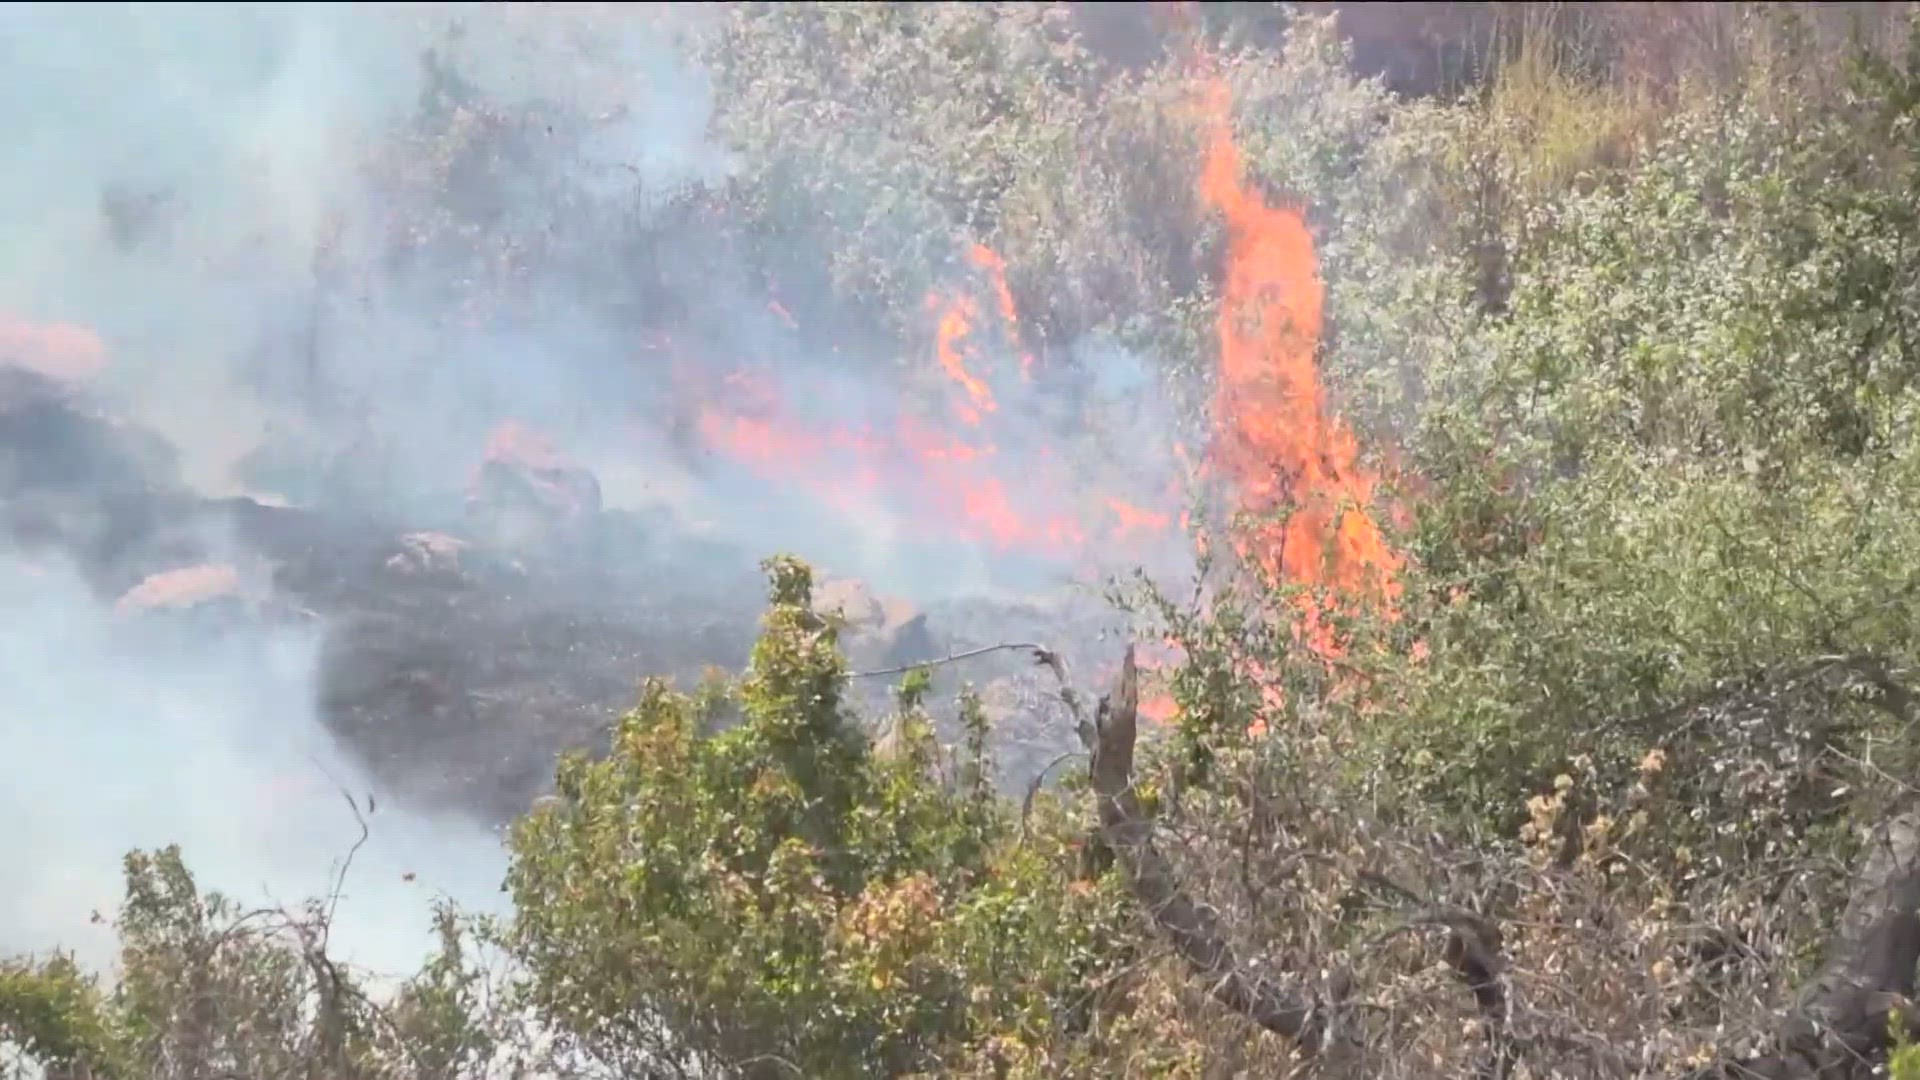 Multiple agencies helped contain the Bunnie Fire in Ramona that burned nearly 200 acres.